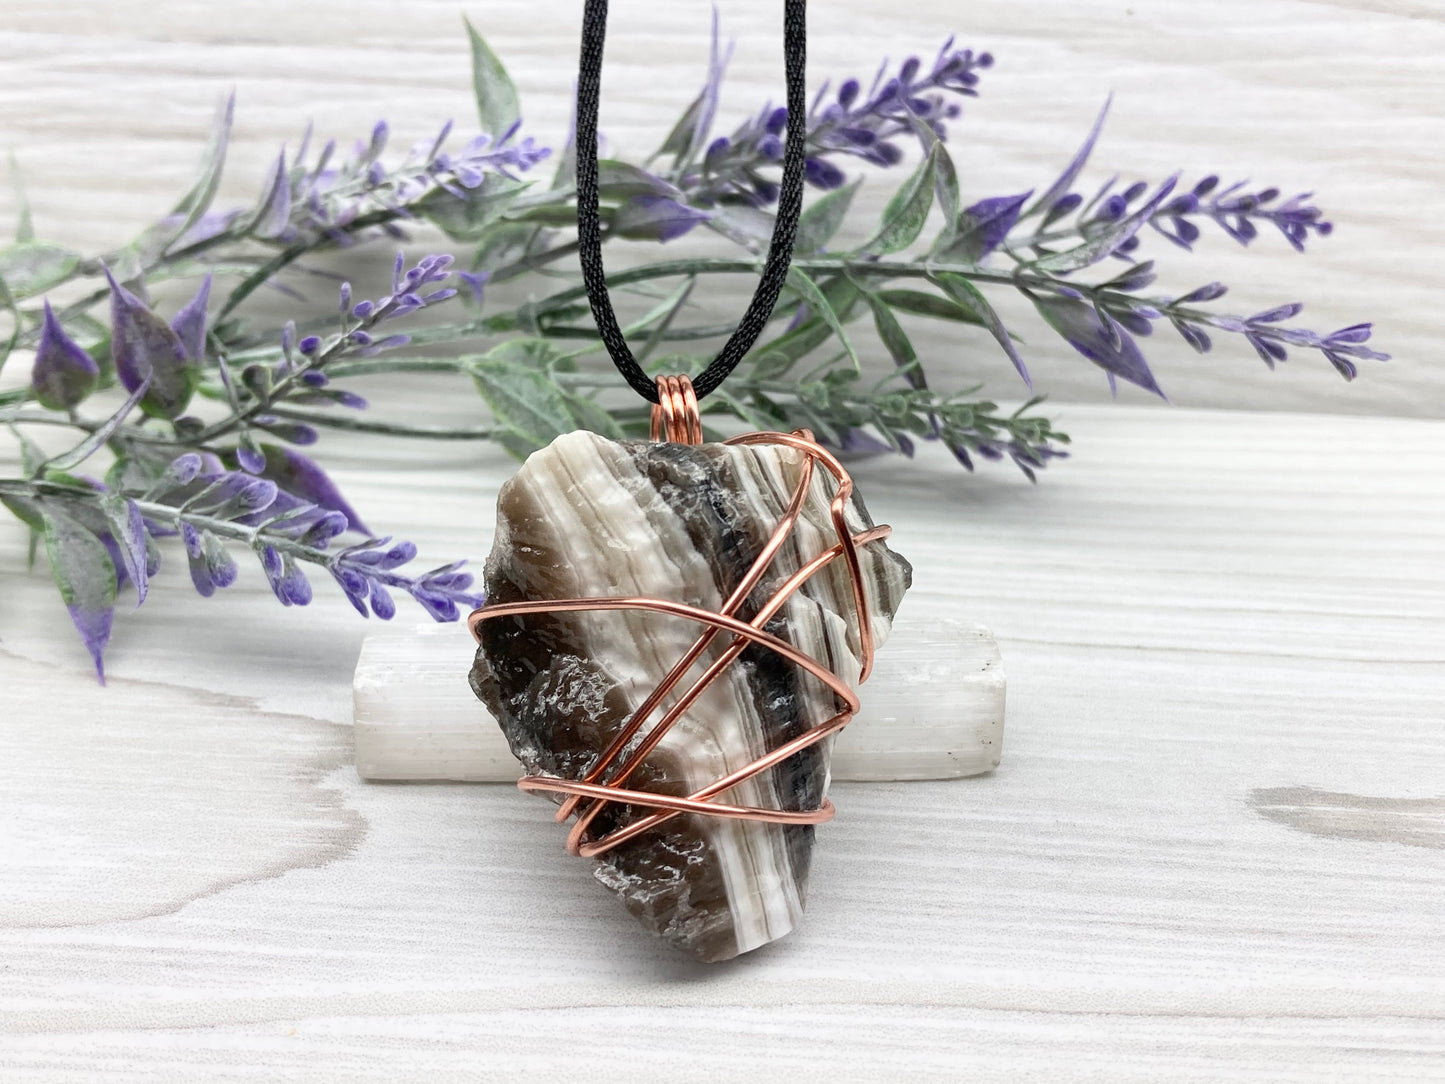 Chunky Phantom Calcite Necklace. Also Known As Zebra Calcite. Copper Wrapped Striped Calcite Pendant. Raw Natural Rough Crystal. Comes On A Black Necklace. New Age Jewelry. 